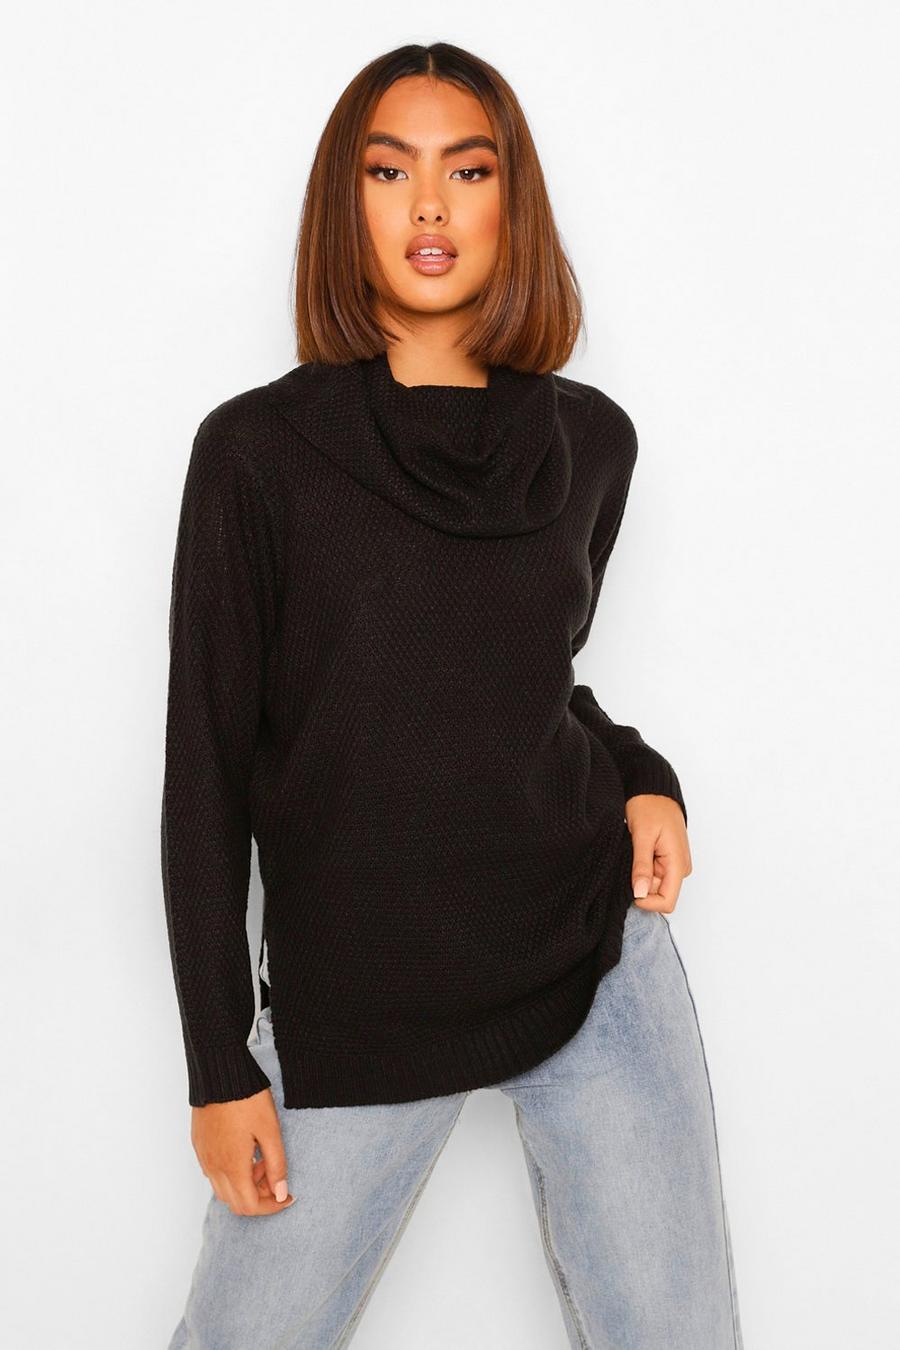 Black Cowl Neck Light Weight Sweater image number 1